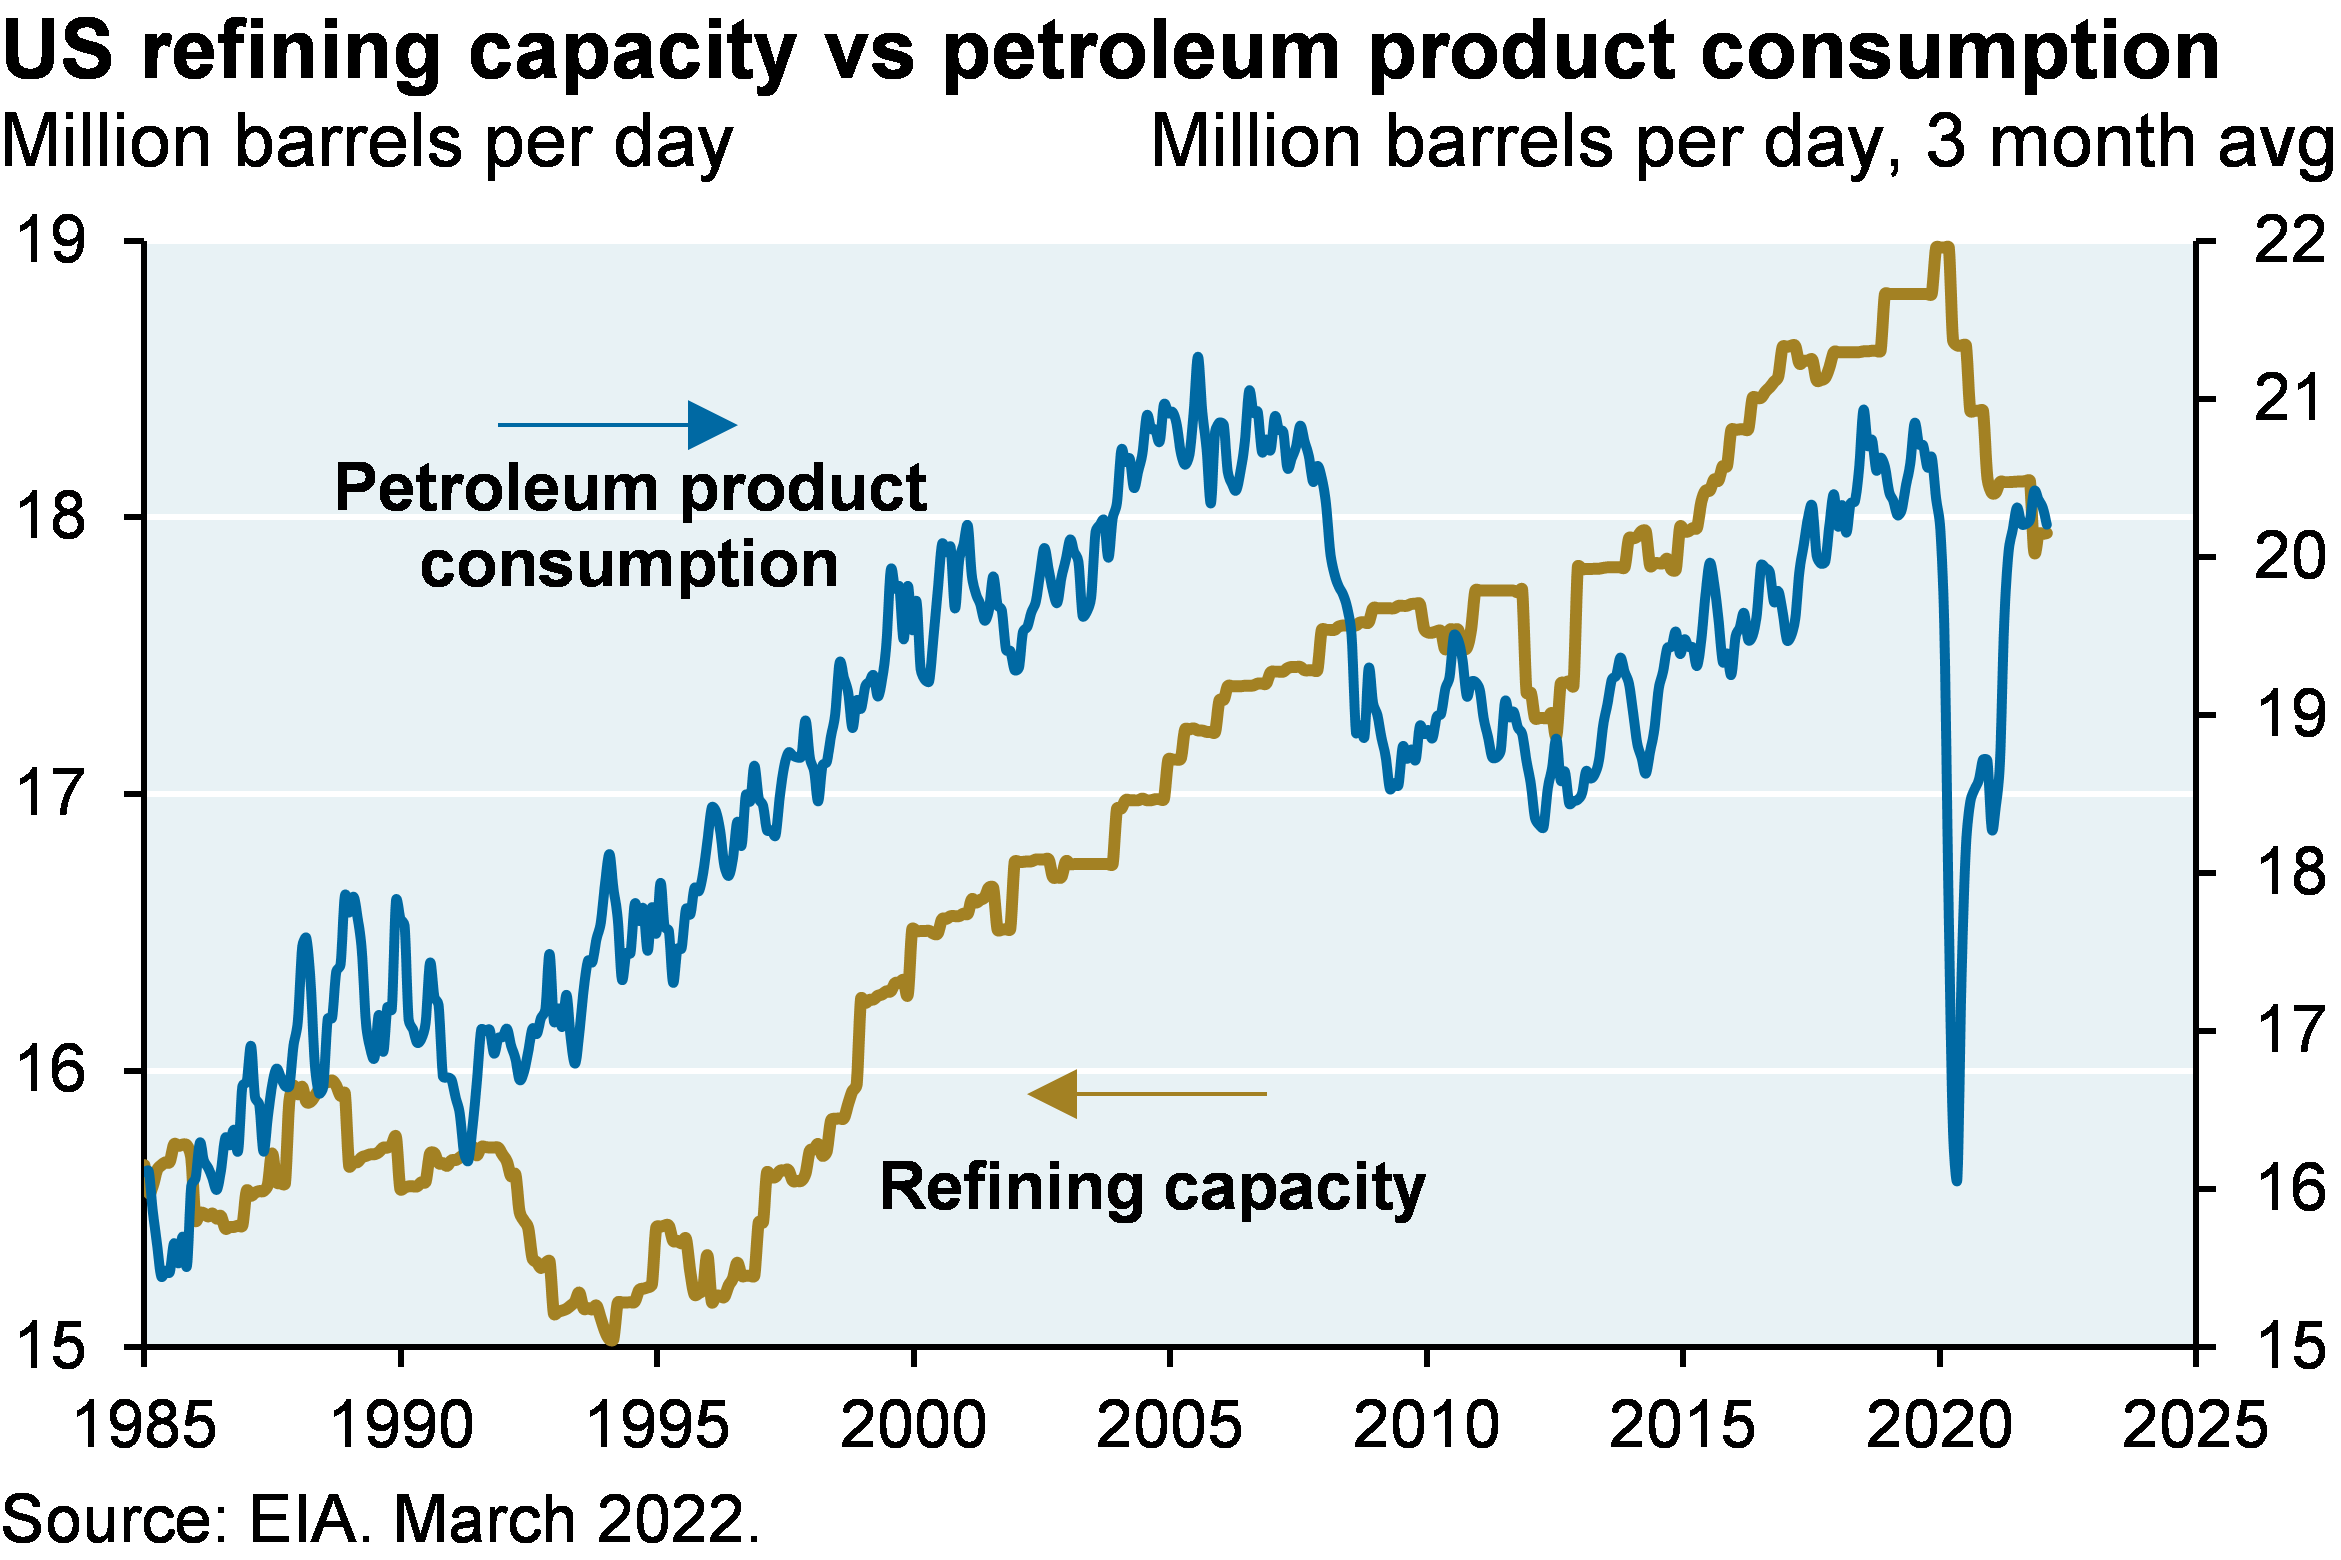 Line chart which plots US refining capacity and petroleum product consumption since 1985.